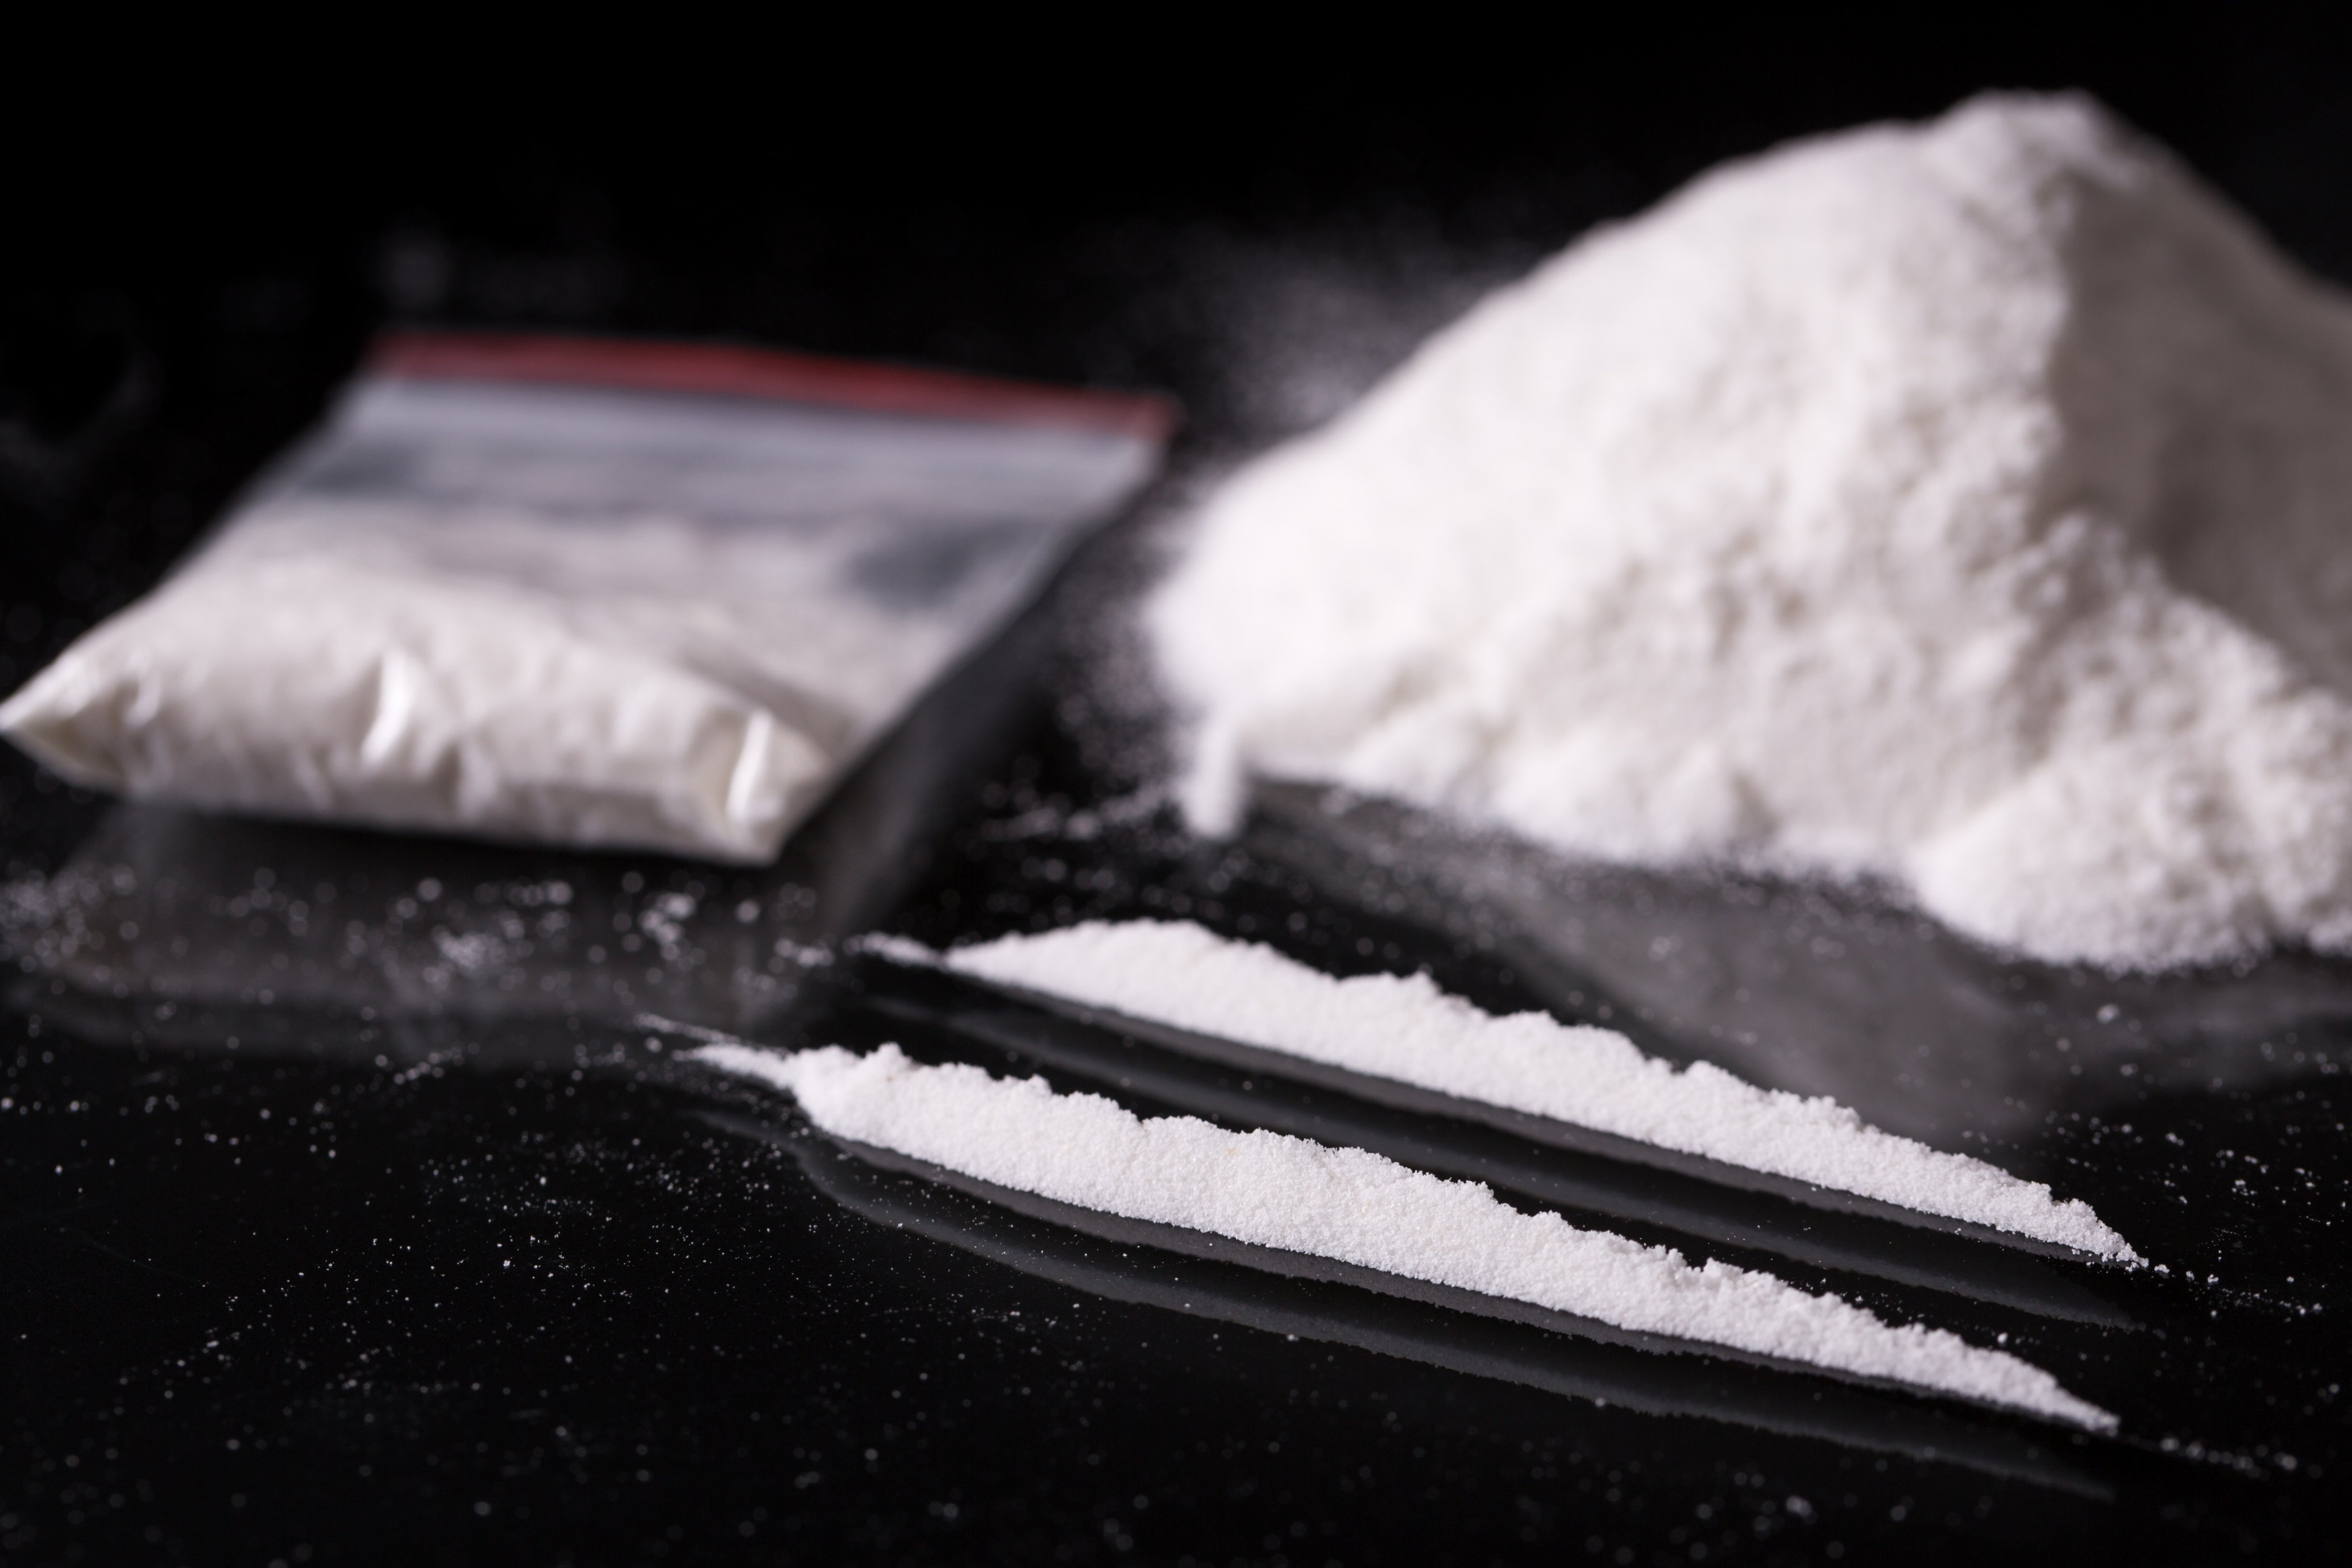 Police have said the group used hotel rooms to store the narcotics. Photo: Shutterstock